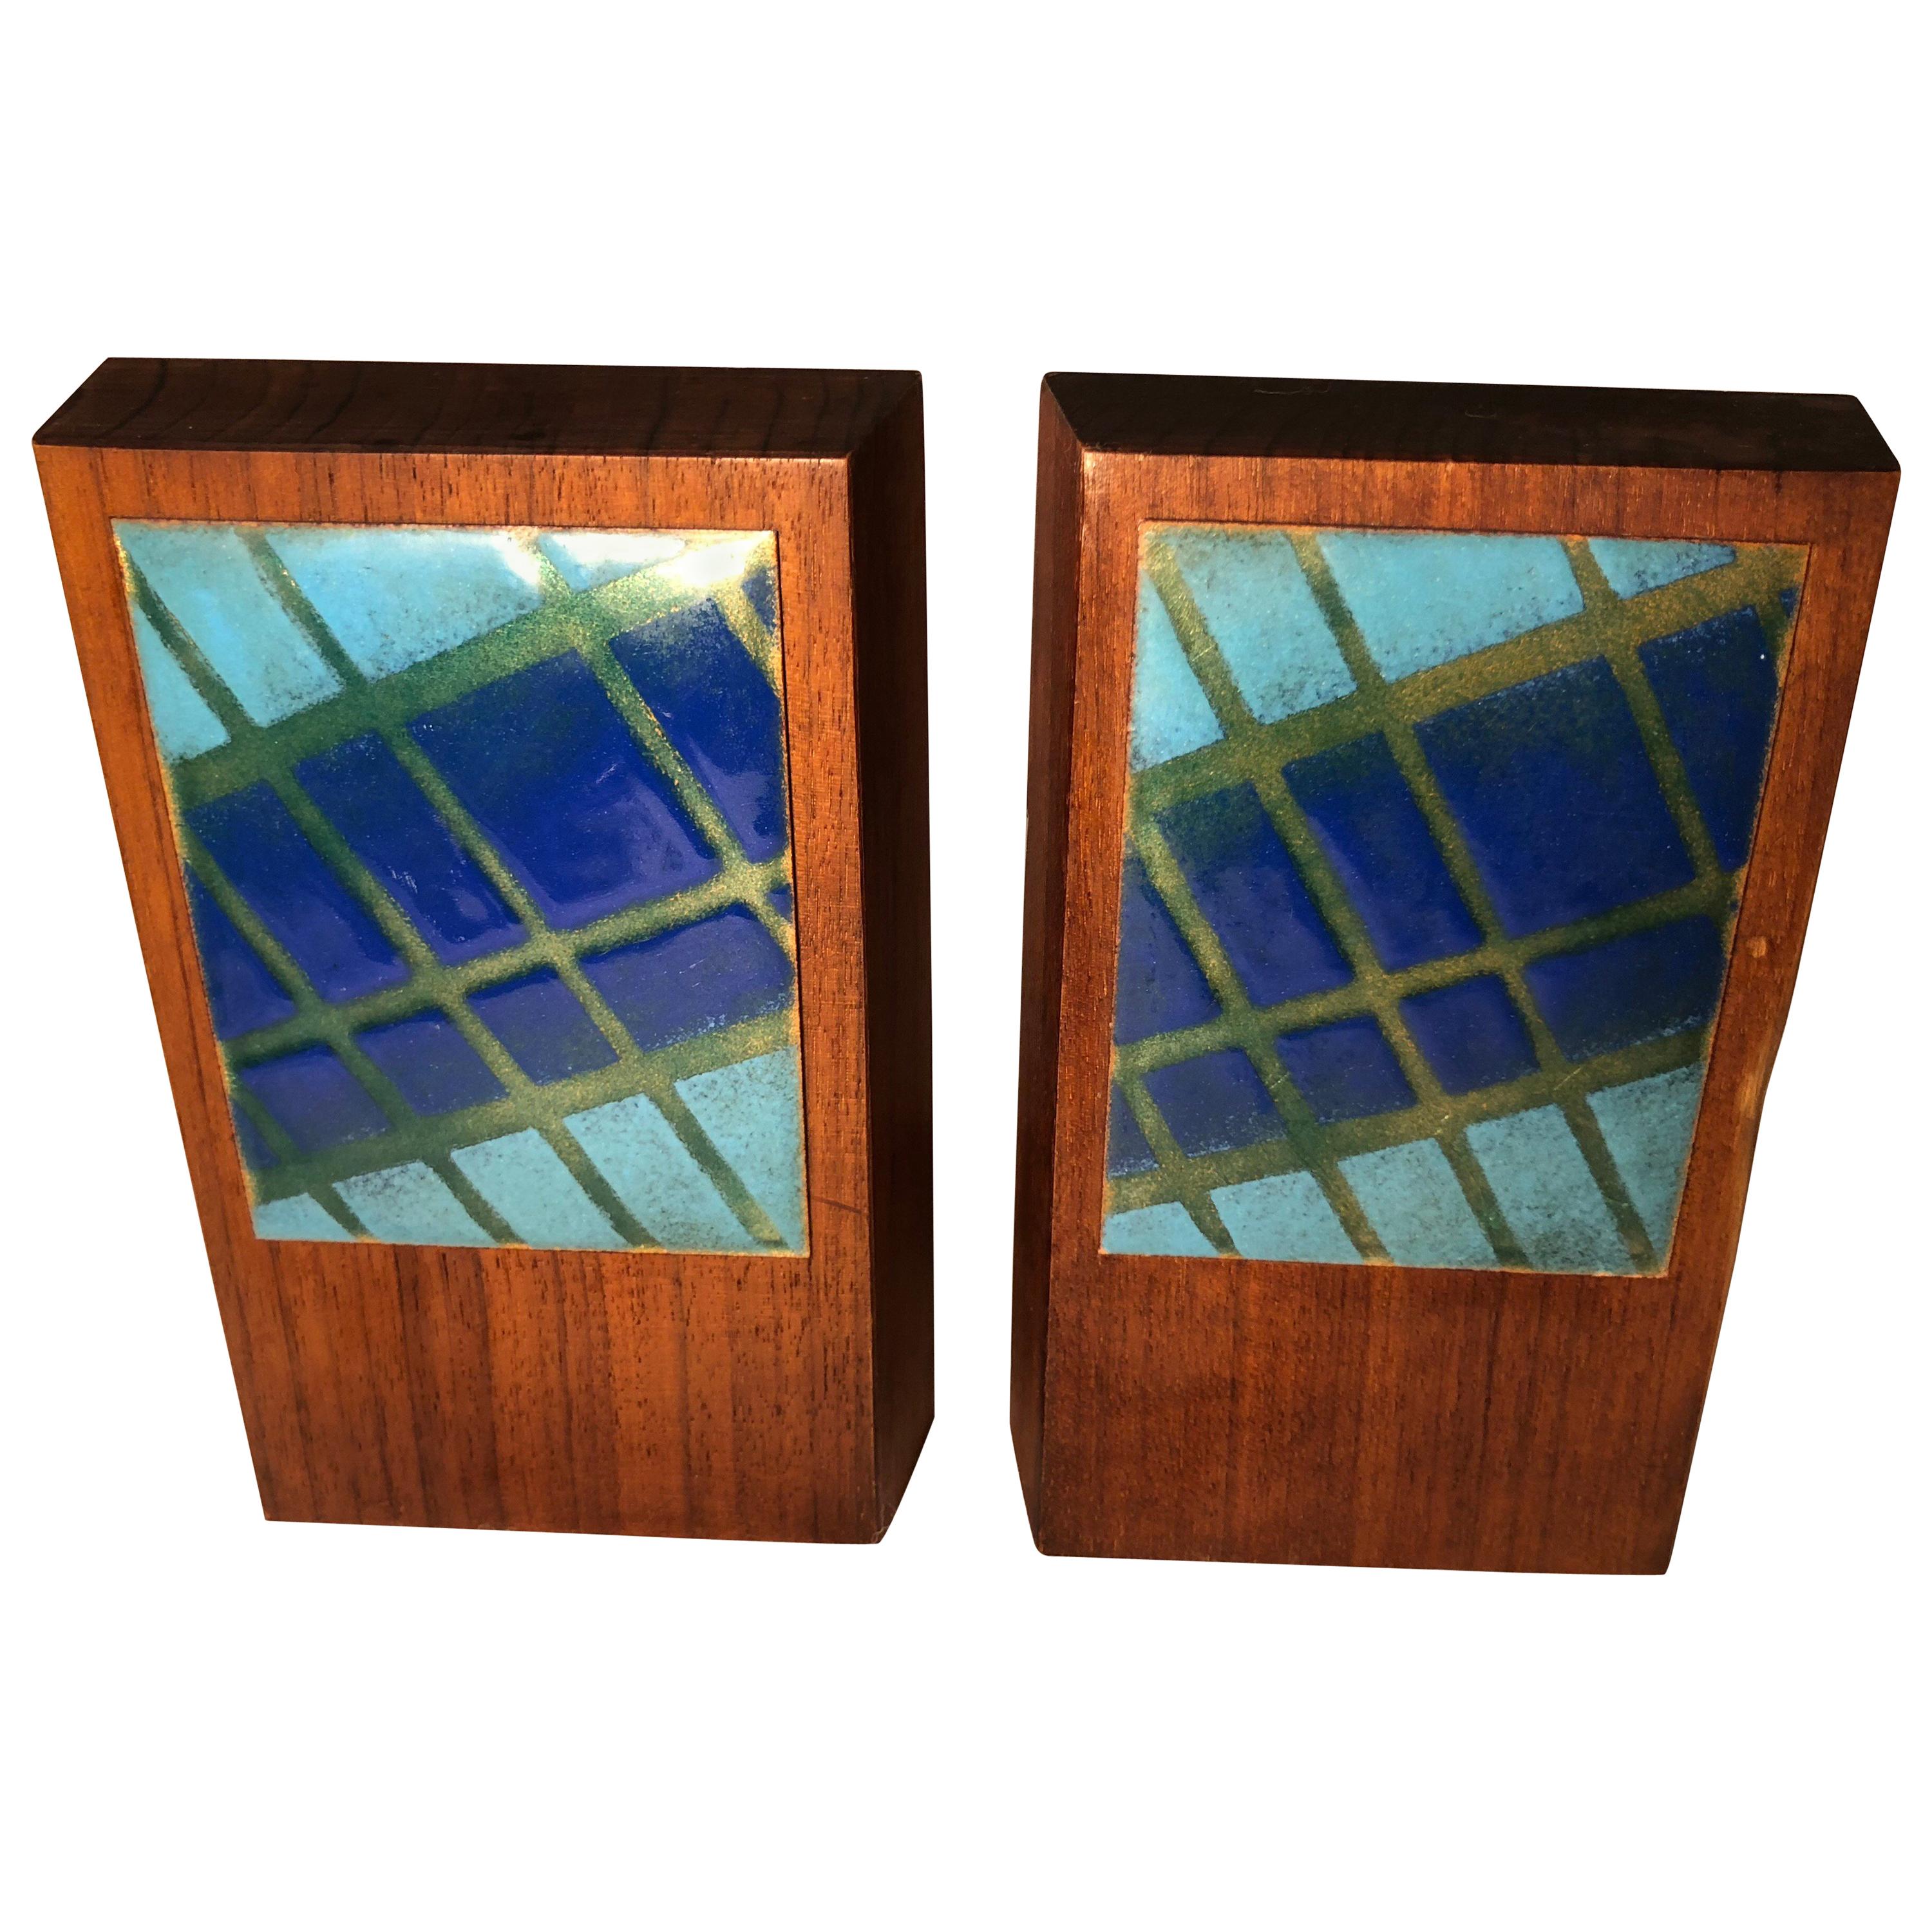 Pair of Mid-Century Modern Walnut and Enamel Bookends by Ernest John